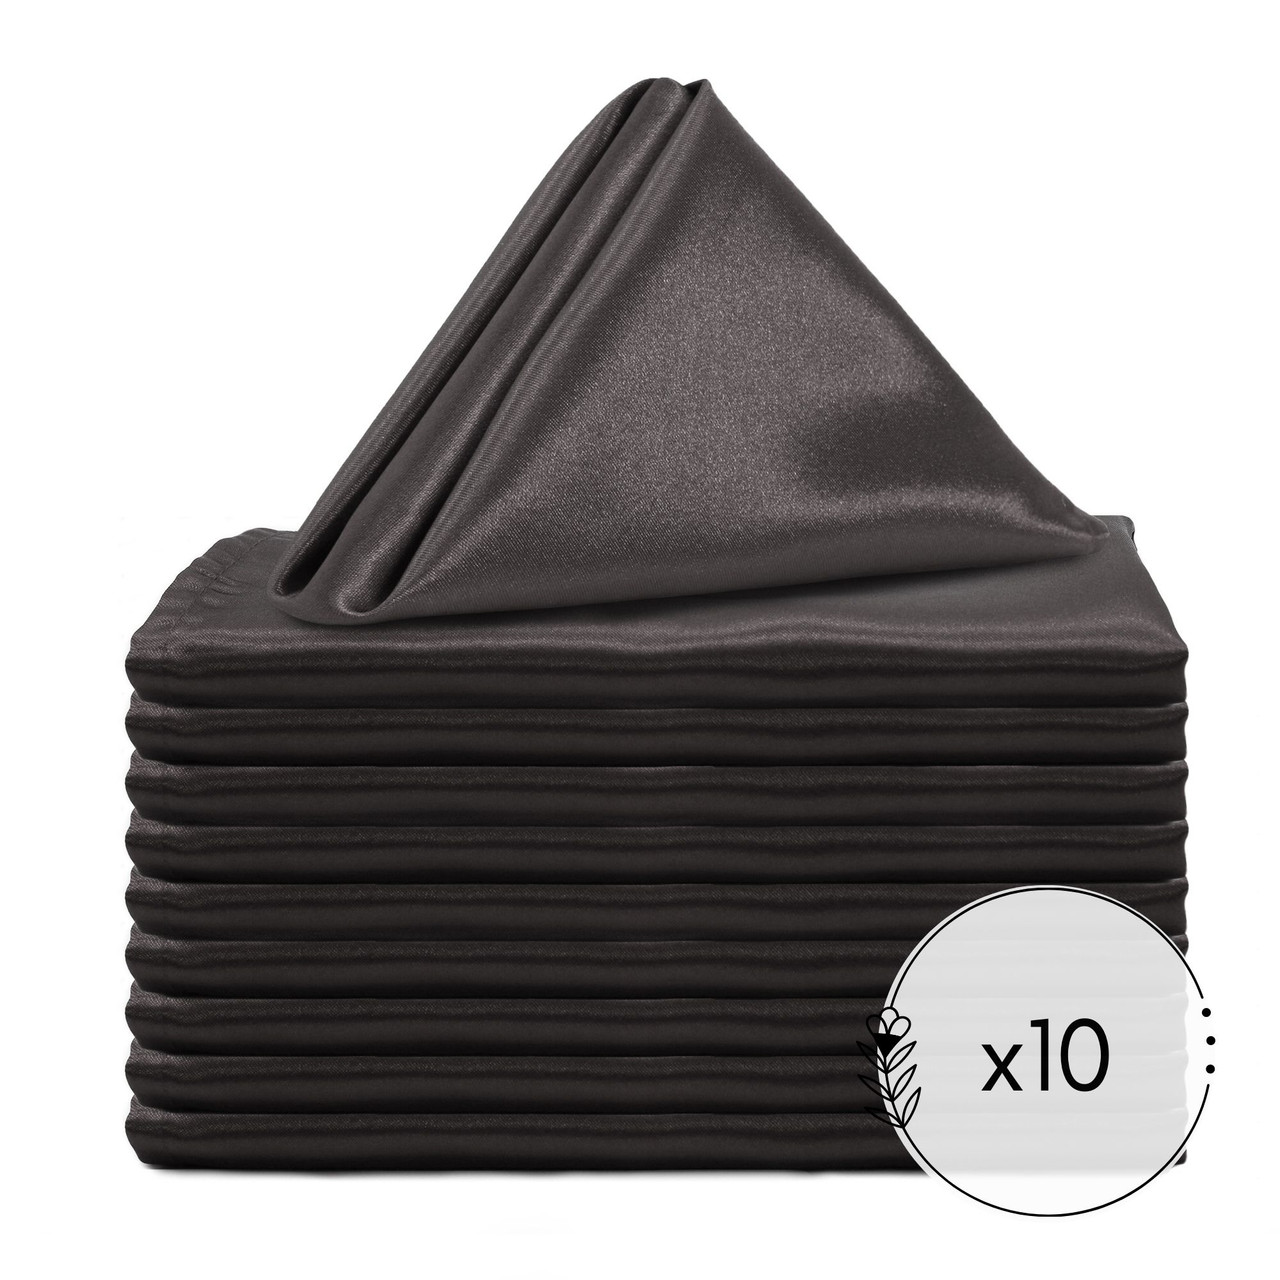 https://cdn11.bigcommerce.com/s-bch7e9/images/stencil/1280x1280/products/498/17093/satin-napkin-black-pack-of-10-2__13339.1688668729.jpg?c=2